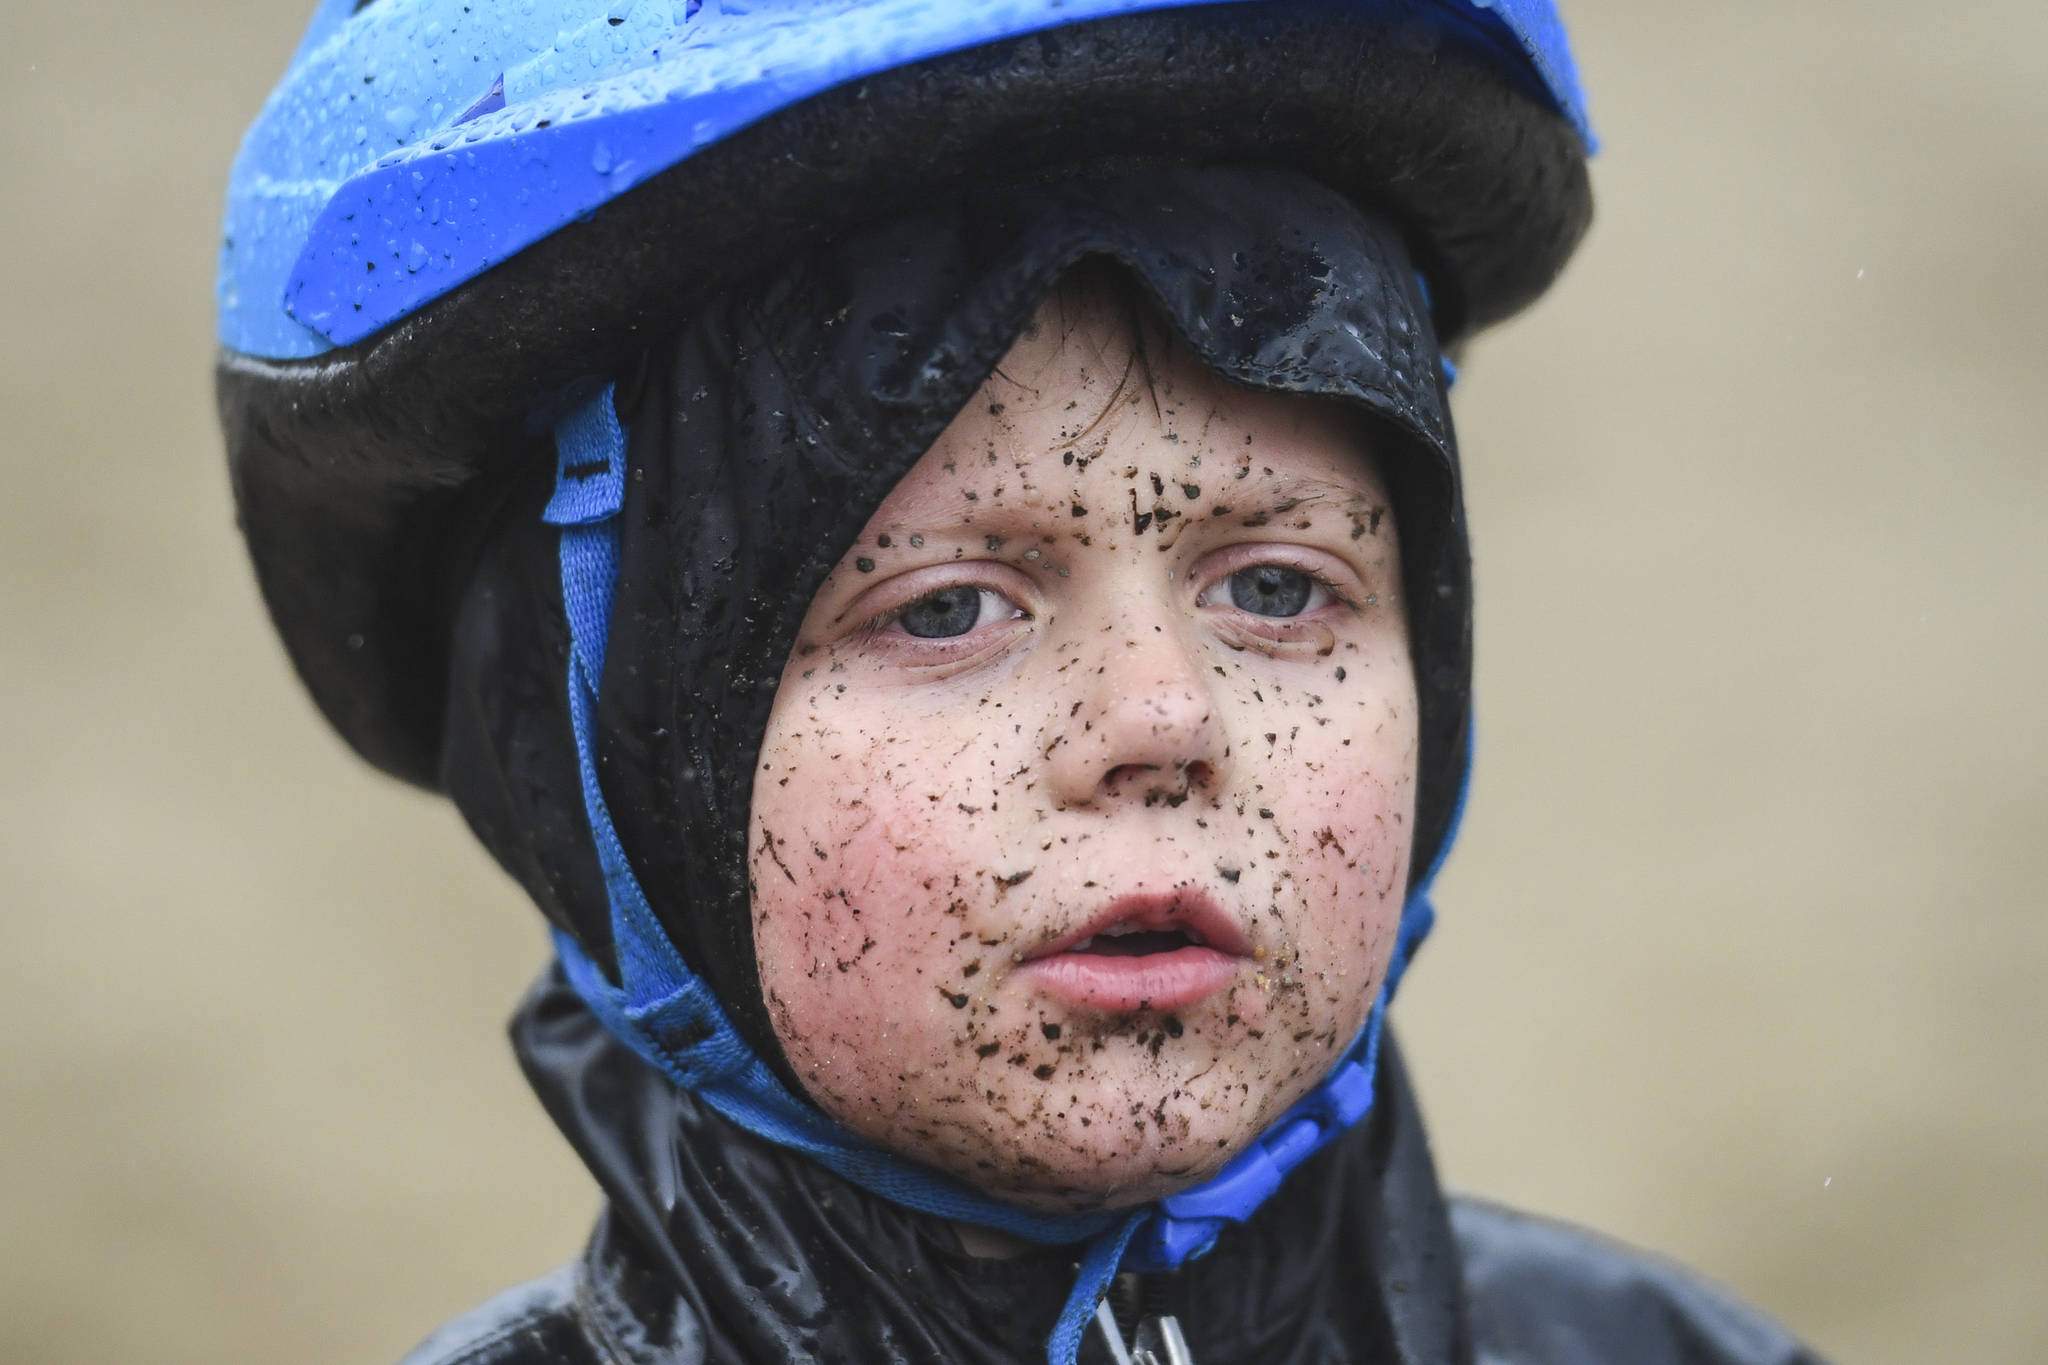 Teller Buchmiller, 6, finishes in the Douglas Dirt Derby Youth Bike Race for 5 to 7-year-olds with a mud splattered face at Savikko Park and the Treadwell Historic Trail on Saturday, Oct. 5, 2019. The event was organized by the Juneau Freewheelers Bicycle Club. (Michael Penn | Juneau Empire)